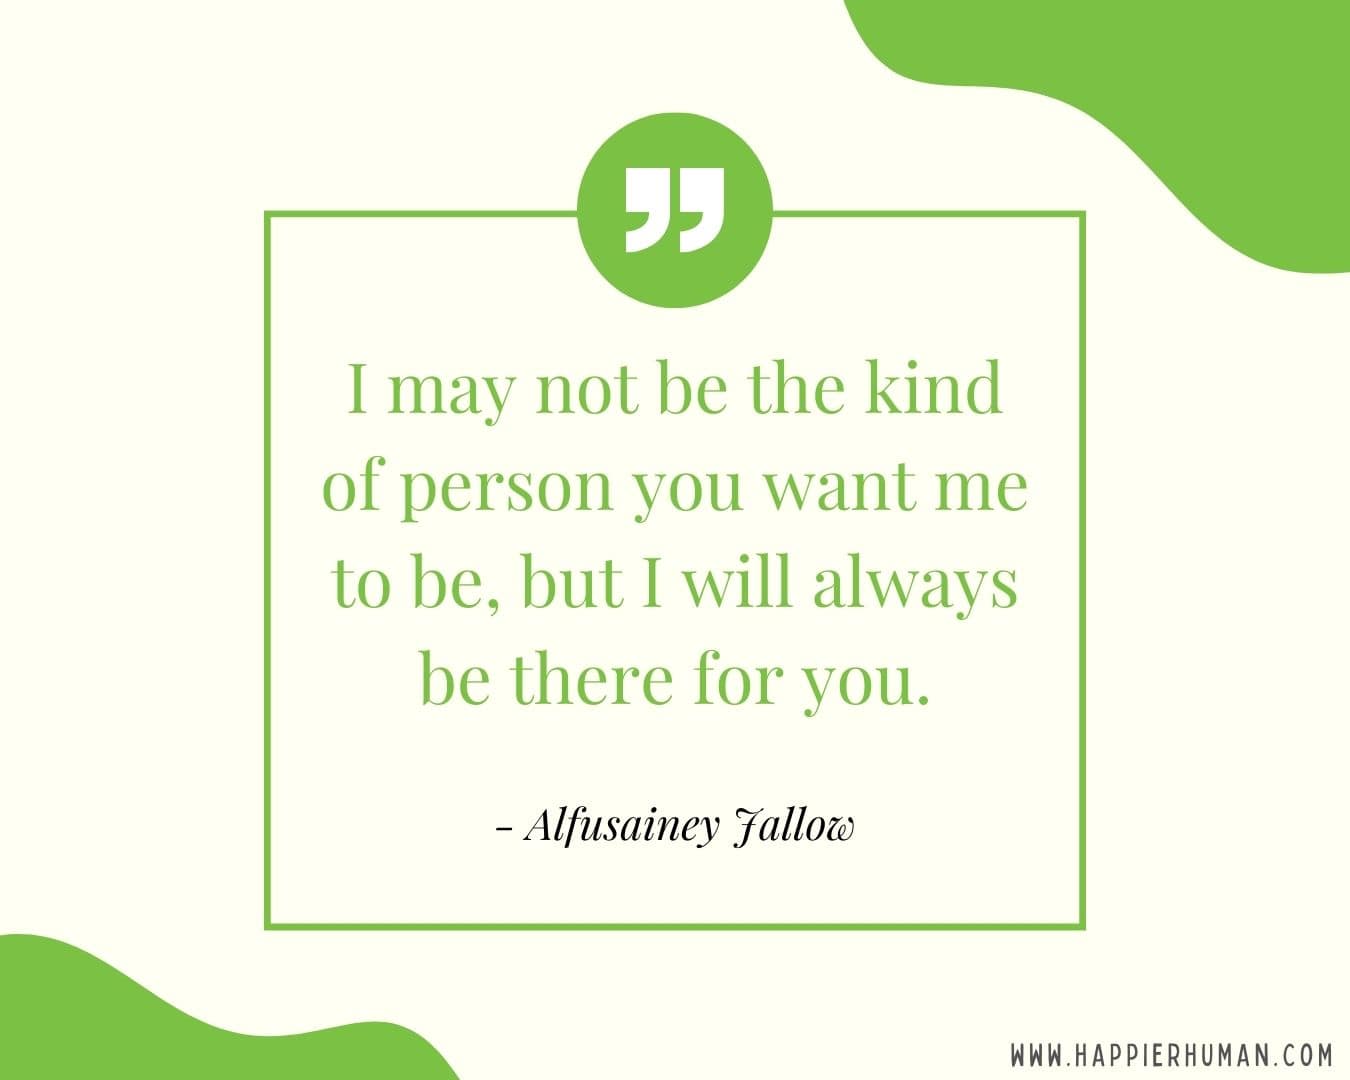 I’m Here for You Quotes - “I may not be the kind of person you want me to be, but I will always be there for you.” – Alfusainey Jallow